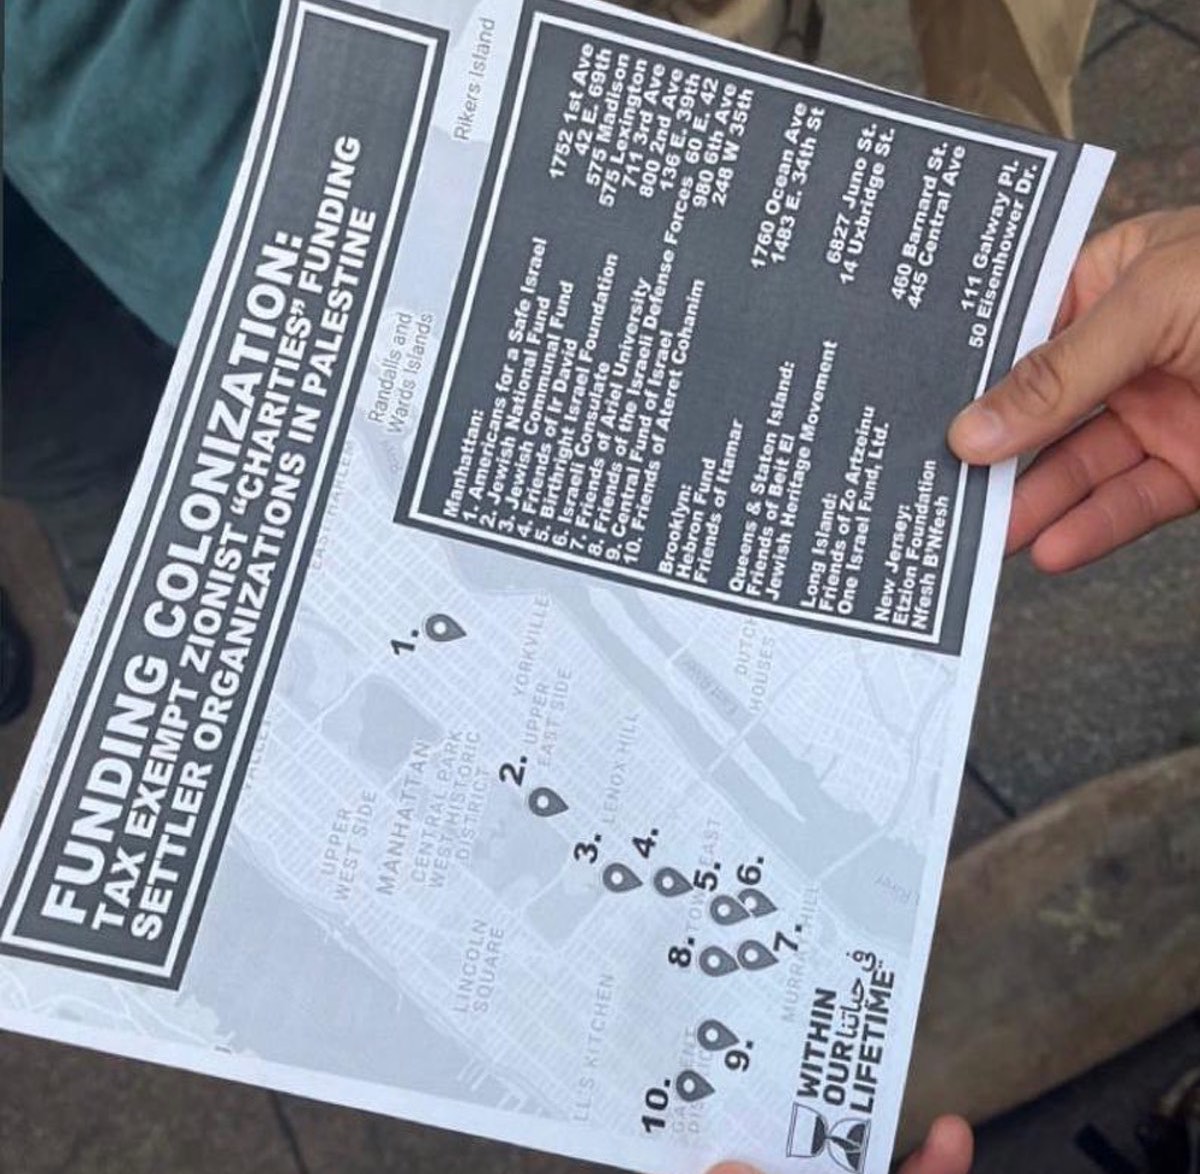 WOL handed out a map to participants with 10 specific addresses of Jewish and Zionist NGOs and foundations across New York City.